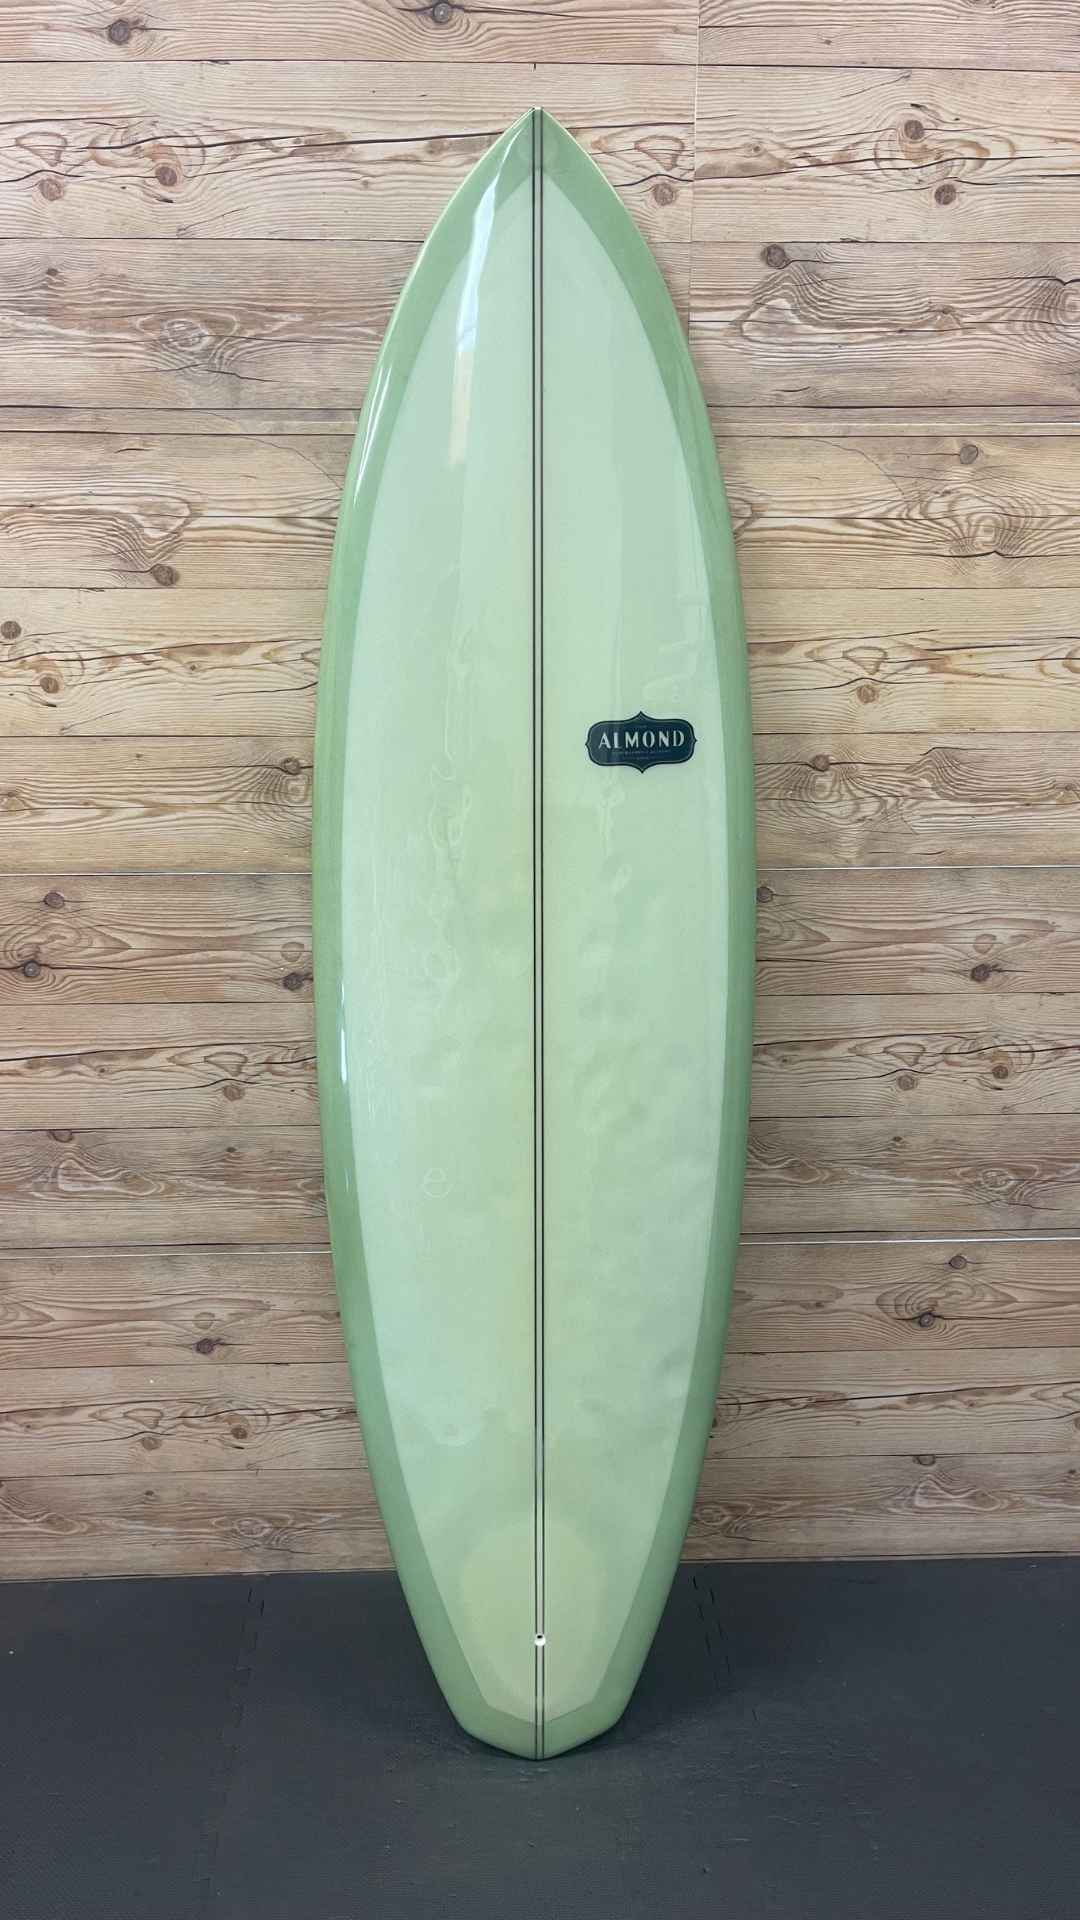 Used Surfboards For Sale San Diego – The Board Source